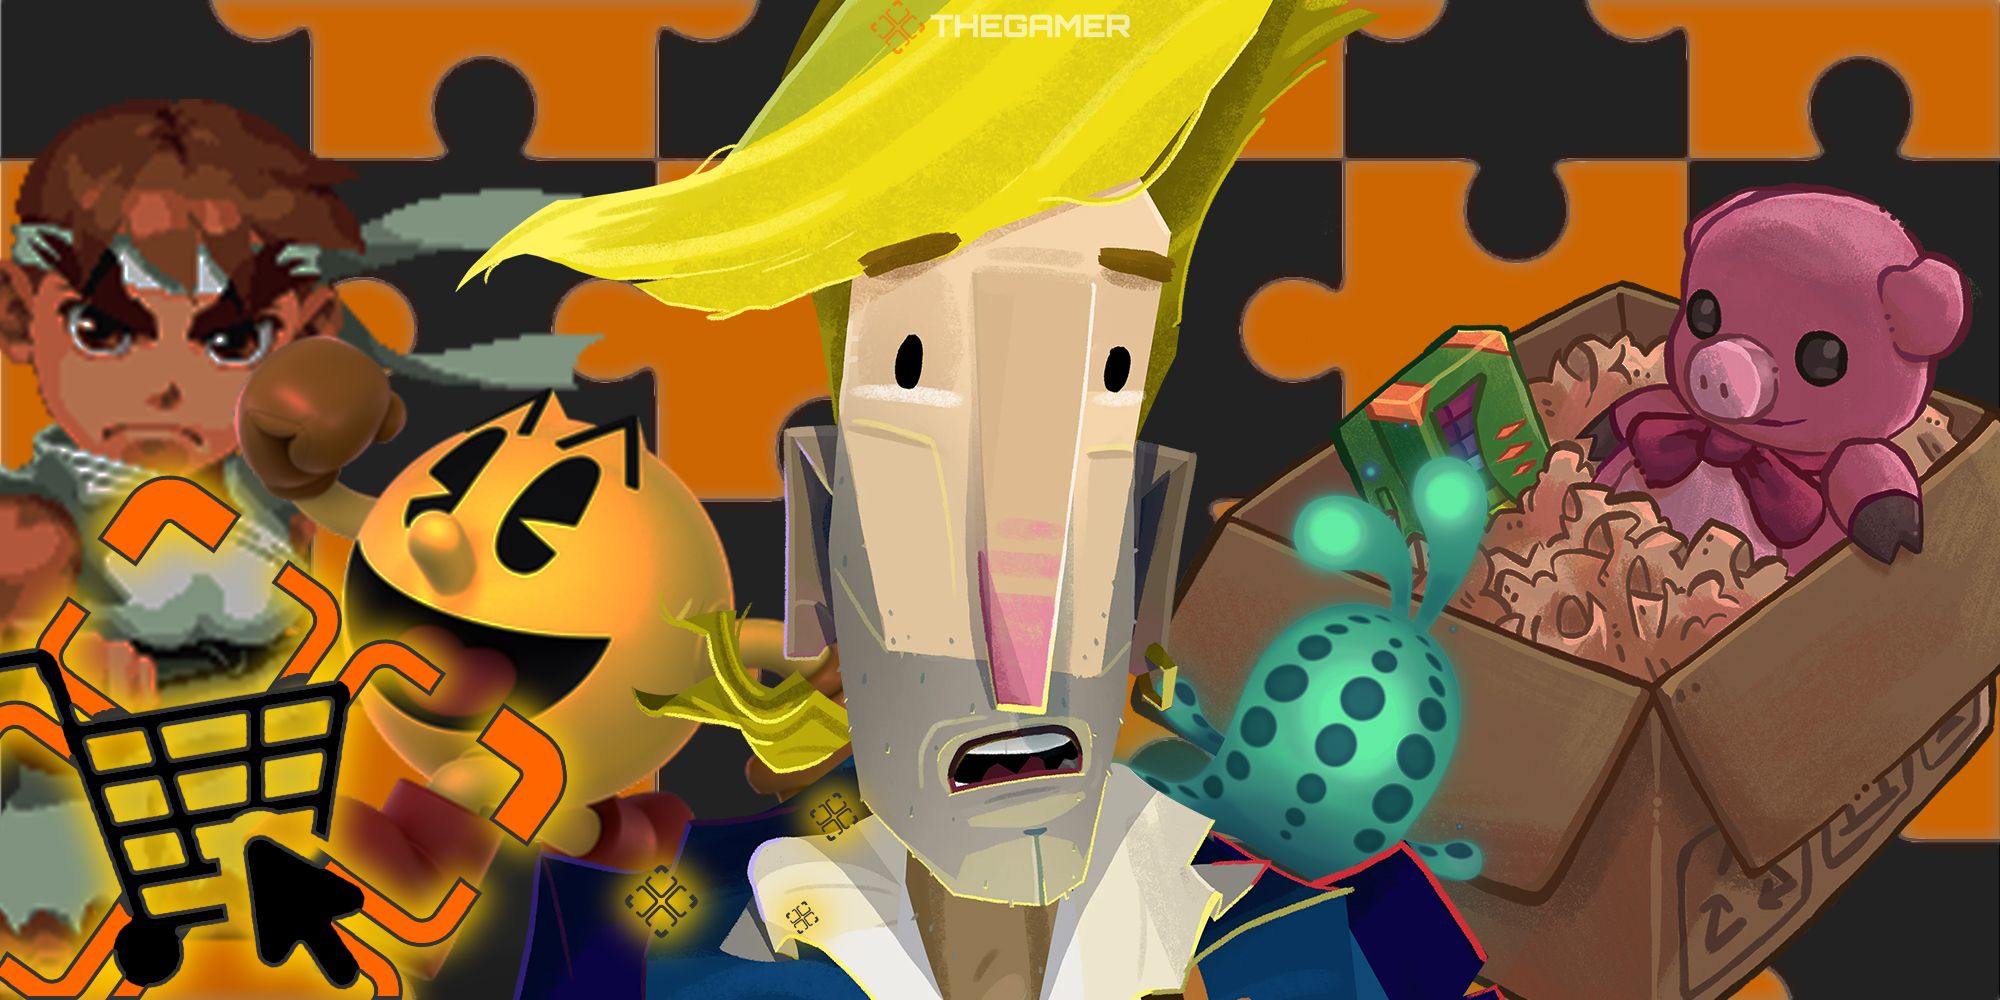 Ryu, PAC-MAN, Guybrush Threepwood, Lumote, and an Unpacking box stand in front of an orange and black jigsaw puzzle. Custom image for TG.